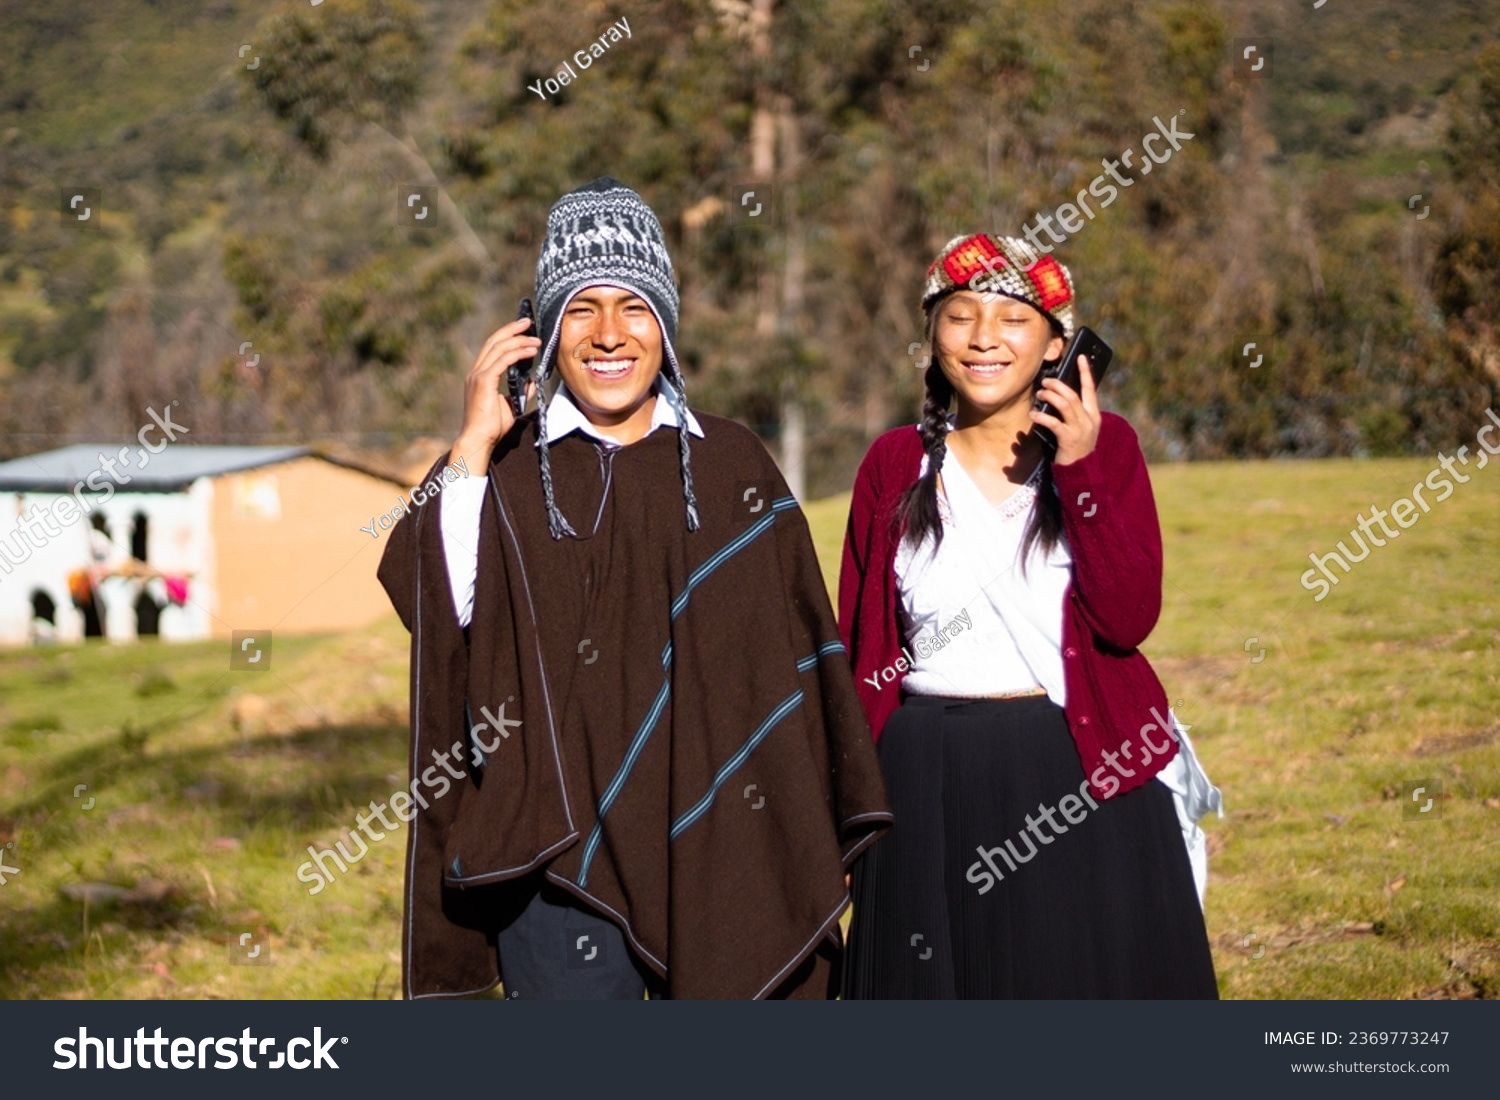 Quechua native man wearing a chullo, poncho and phone next to an attractive woman holding cell phone in her hand, outdoors, communication #2369773247